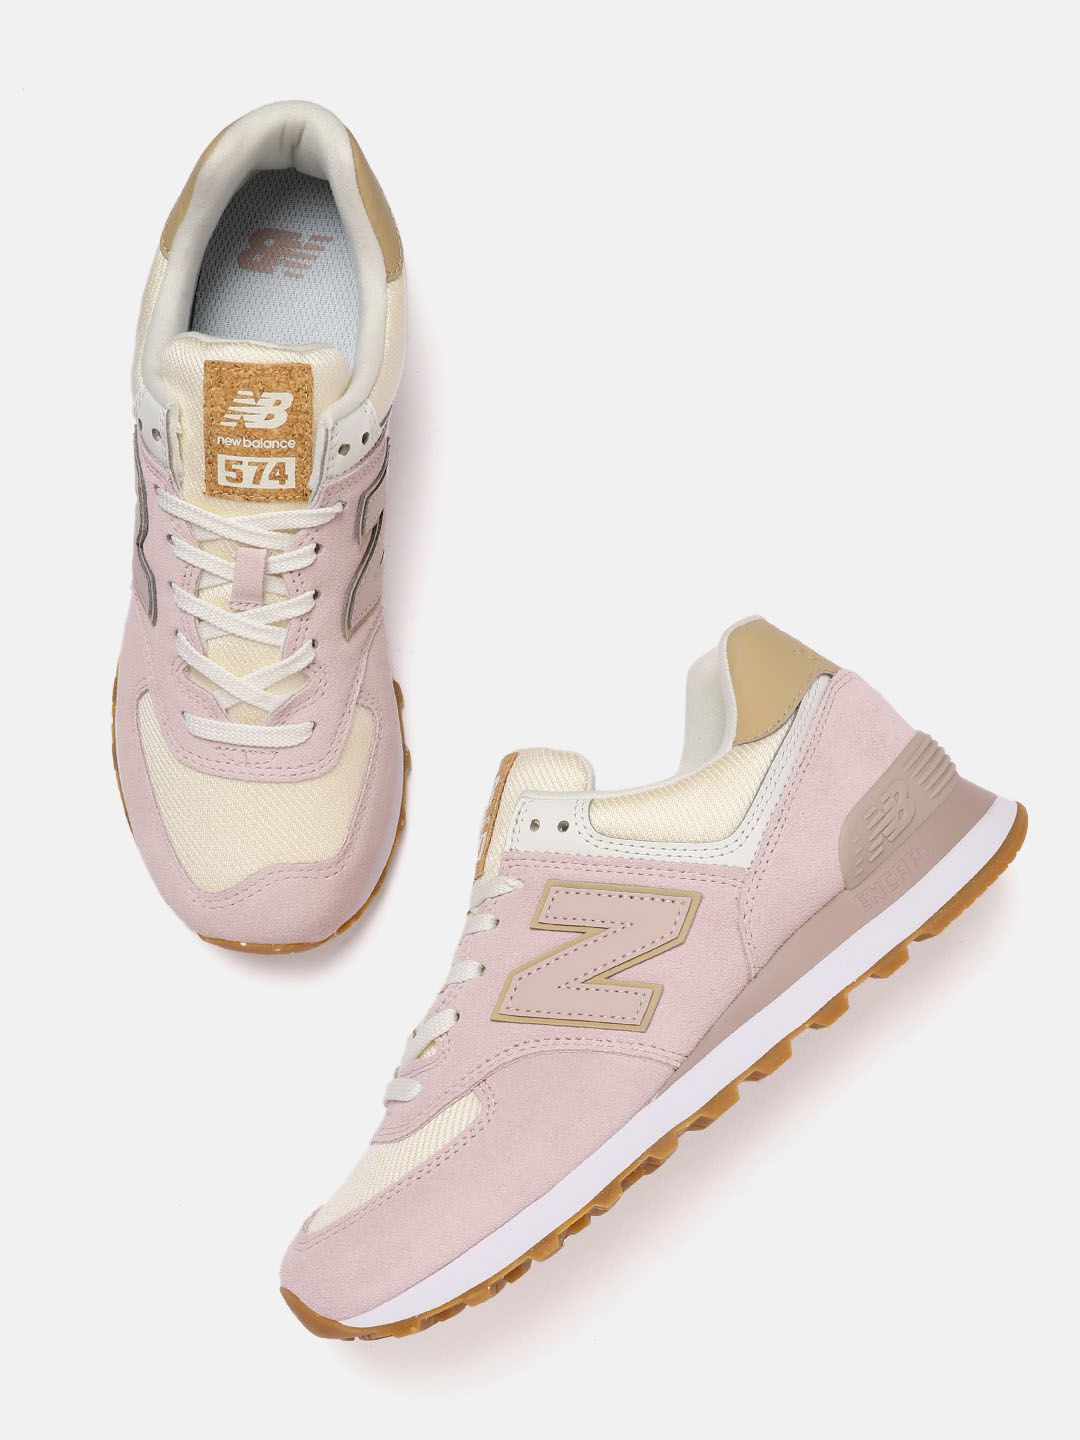 New Balance Women Pink Woven Design Suede Sneakers Price in India